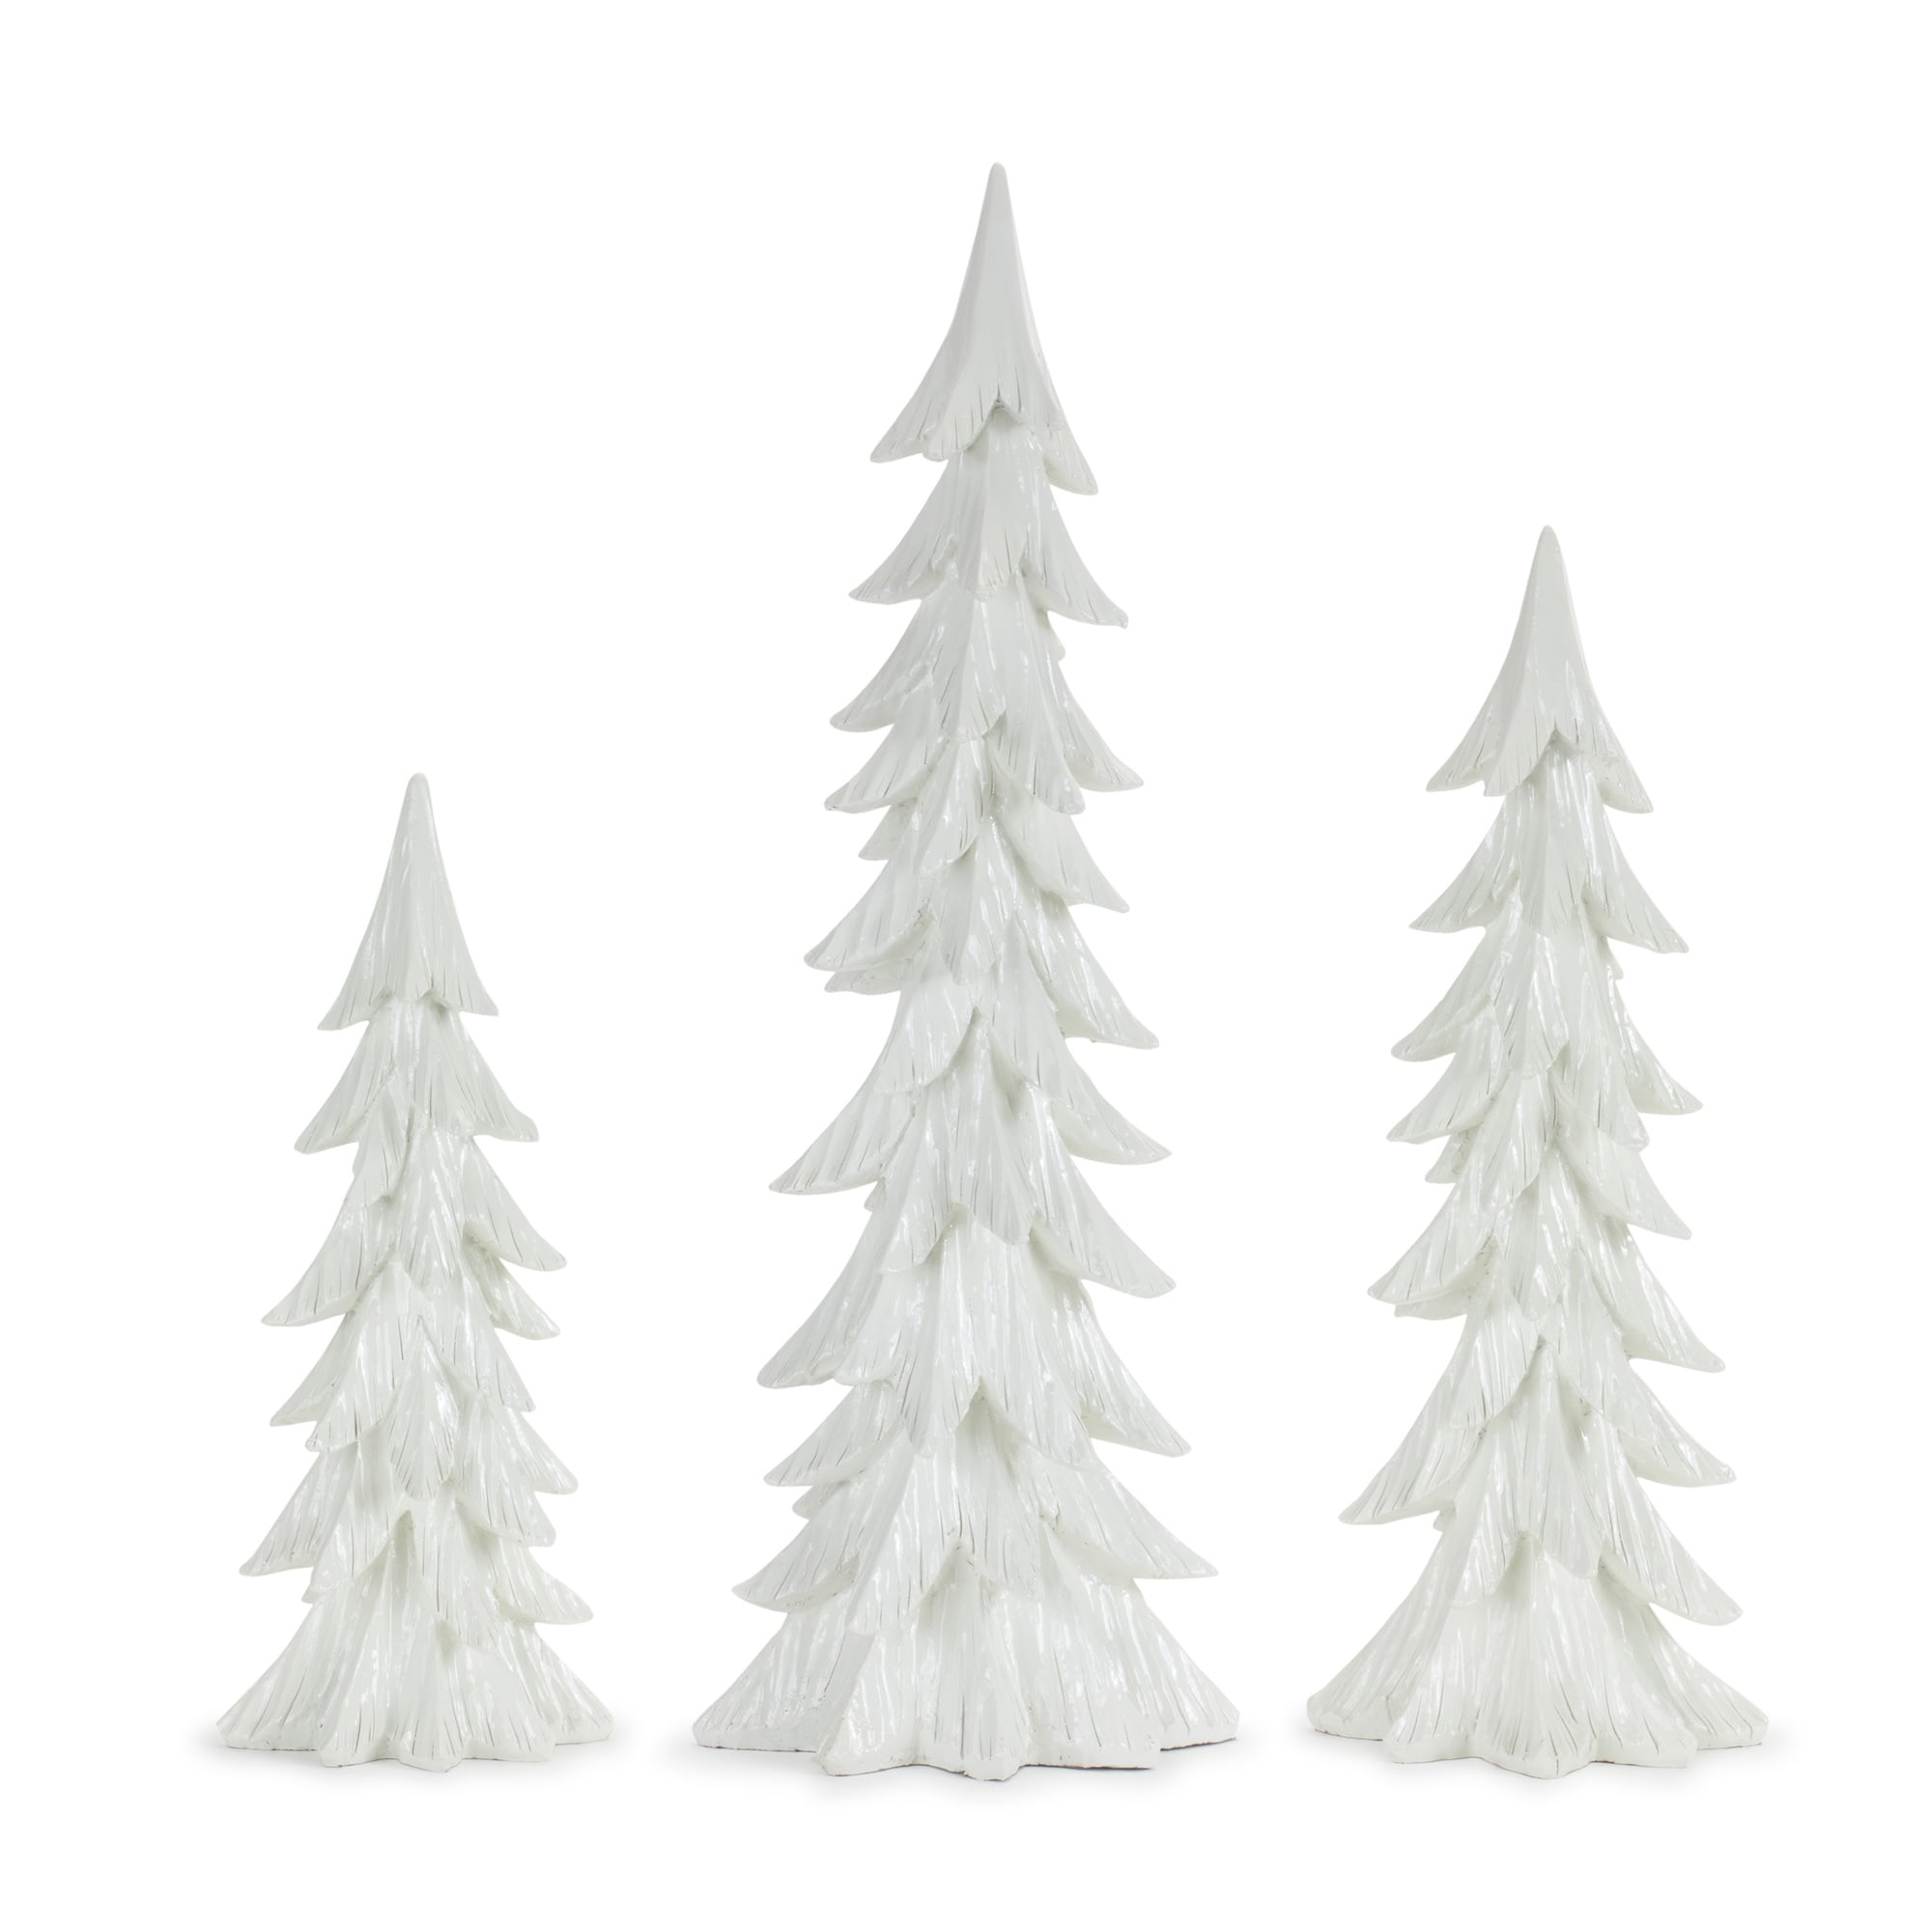 RM ROOMERS White Christmas Tree Figurine, Resin Christmas Tree, Tabletop  Christmas Tree Set of 2, Tree Centerpieces for Tables, Accessories for  Village Winter a…